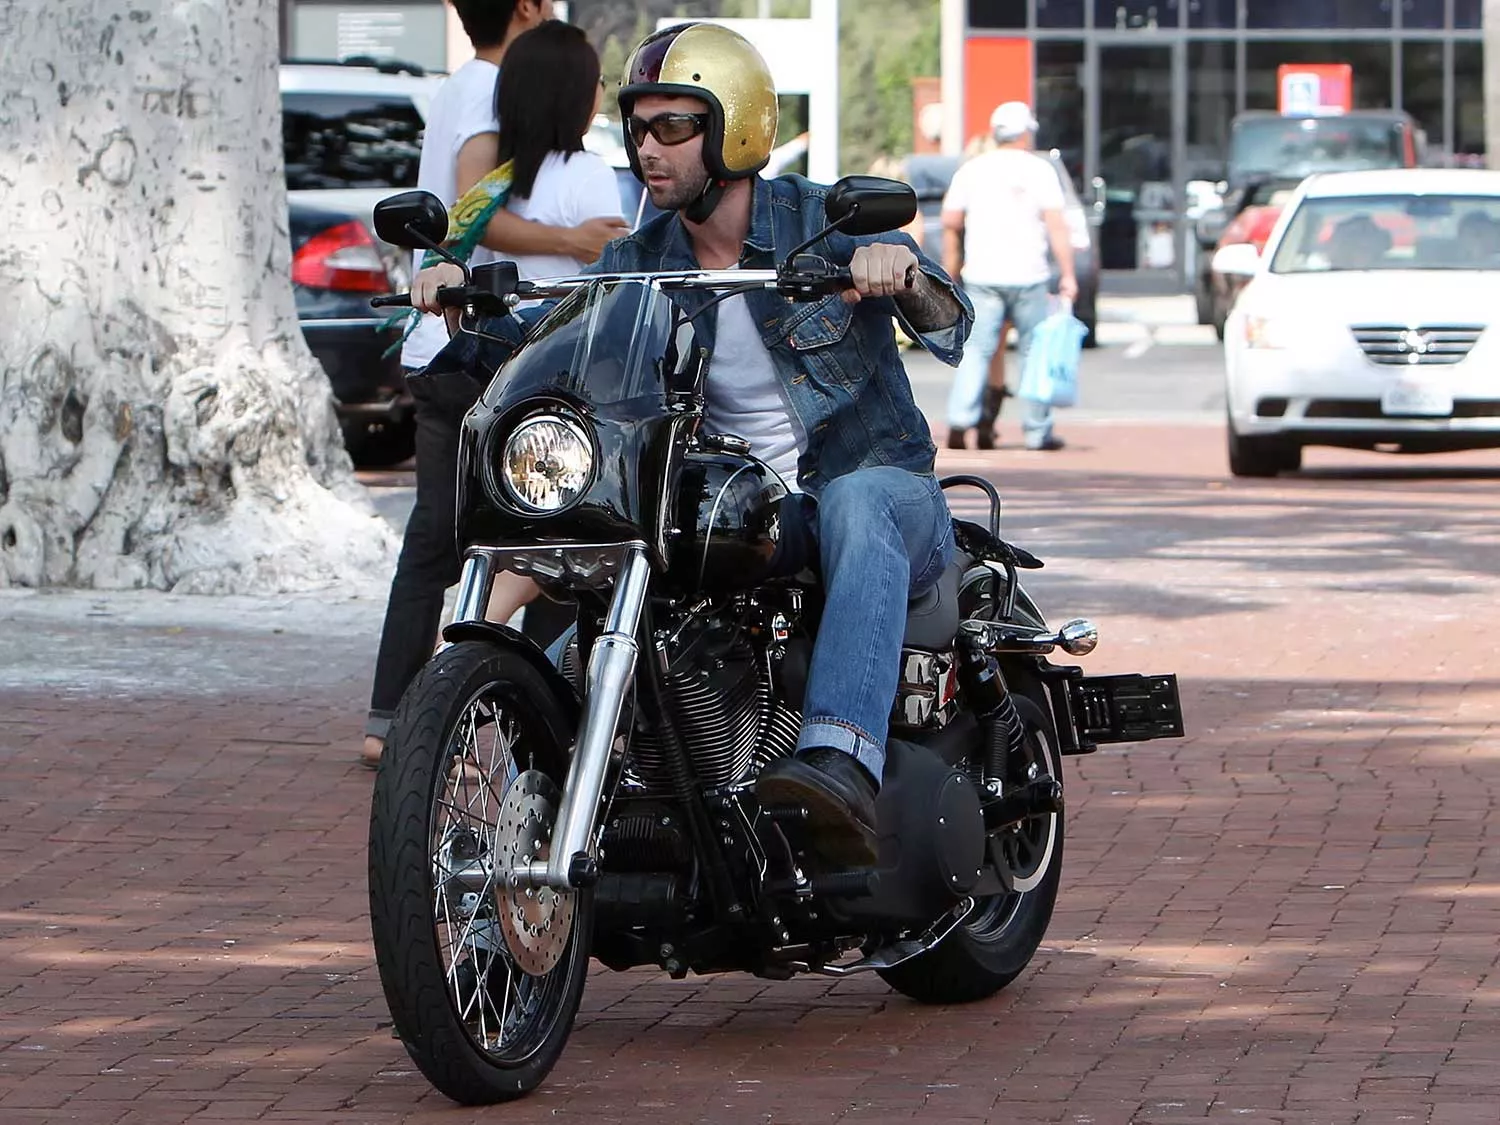 Maroon 5 singer Adam Levine is shown riding through a parking lot in Malibu on his H-D